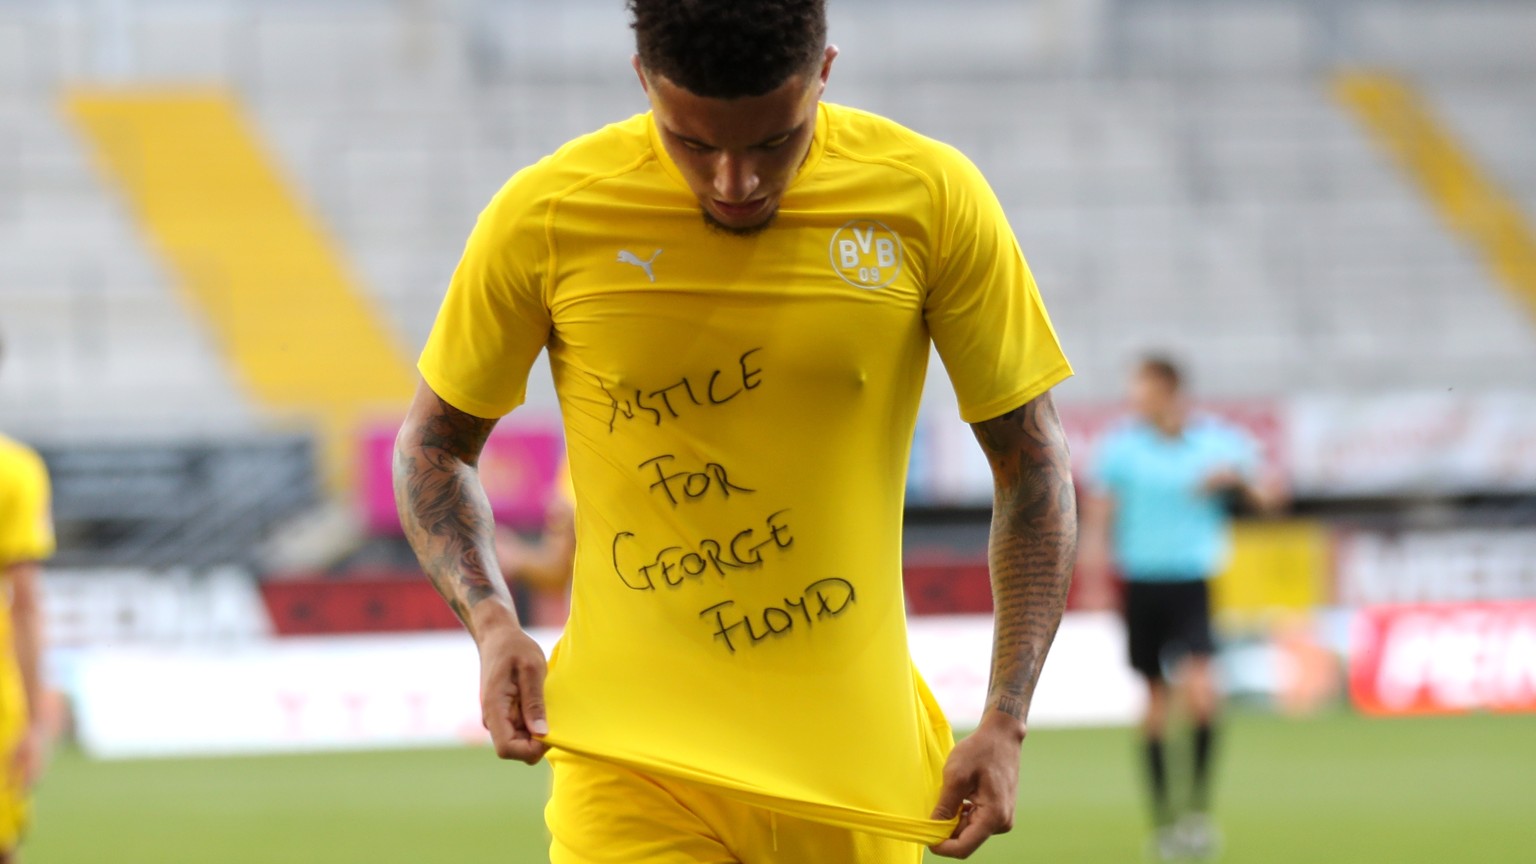 epa08456508 Jadon Sancho of Borussia Dortmund celebrates scoring the 0-2 goal with a &#039;Justice for George Floyd&#039; shirt during the German Bundesliga soccer match between SC Paderborn 07 and Bo ...